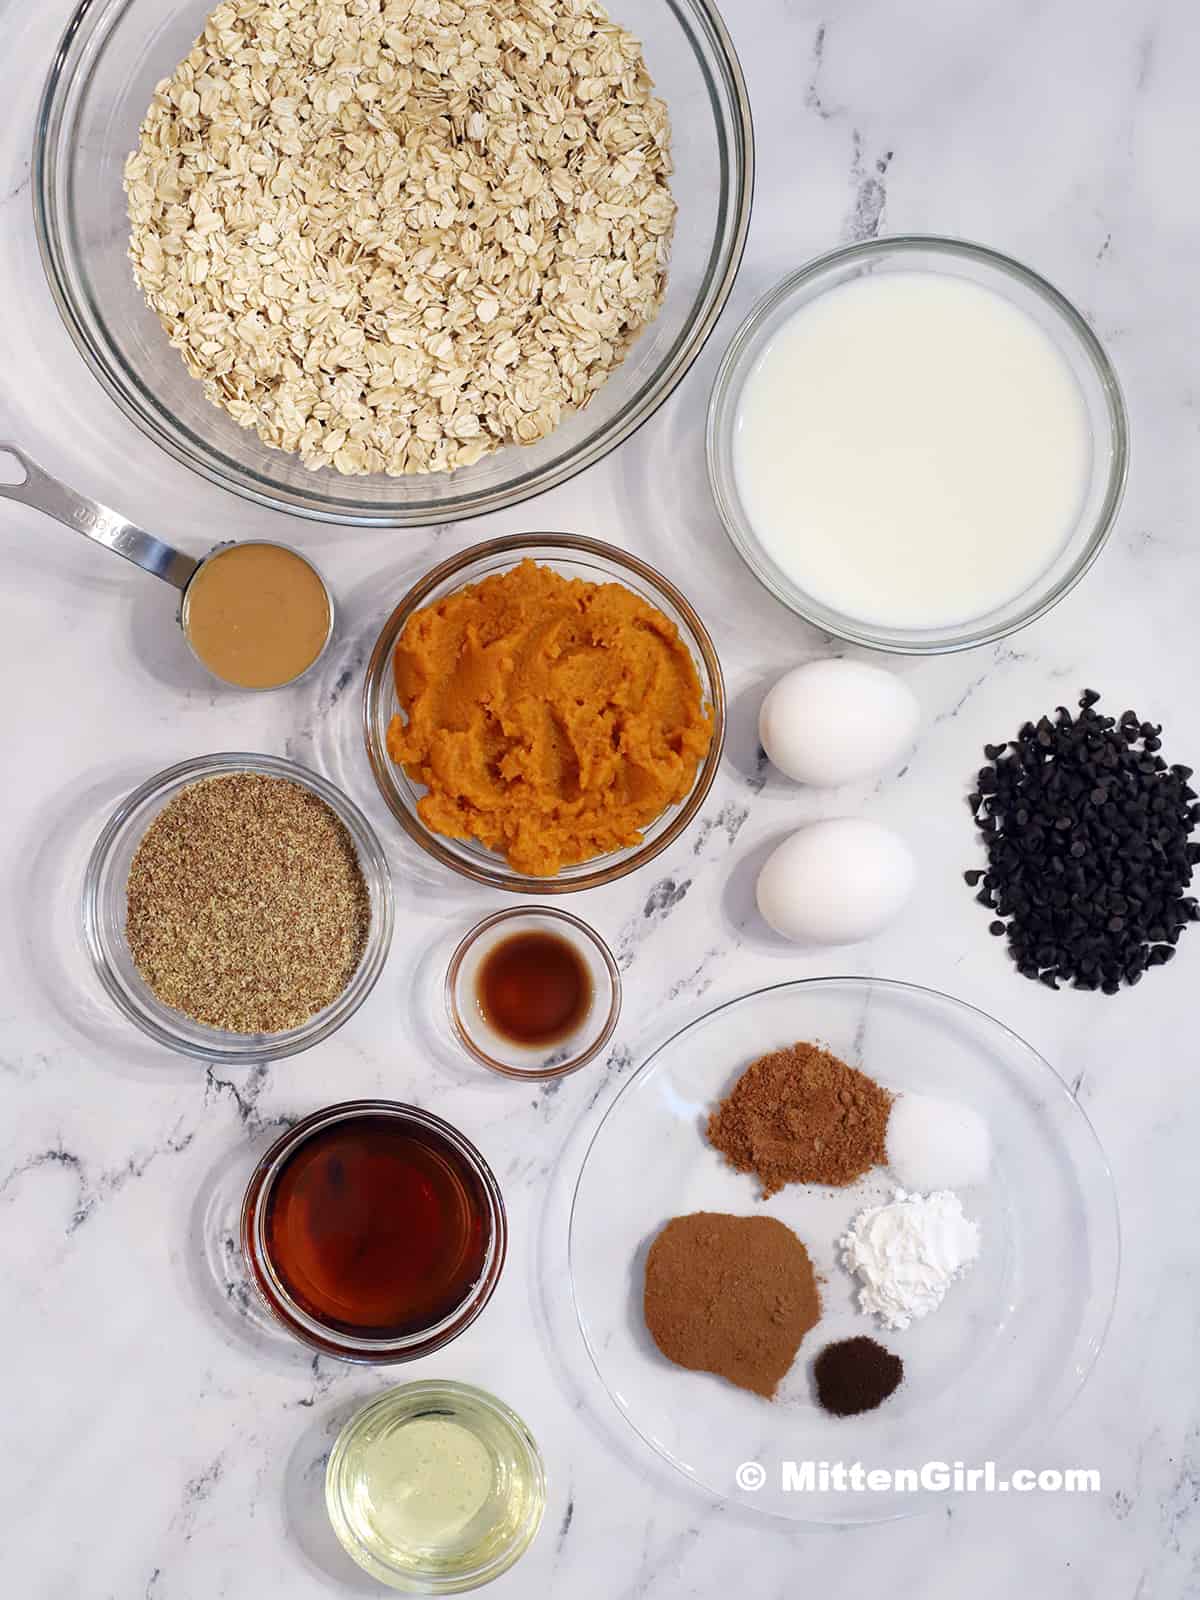 Ingredients for pumpkin baked oatmeal.